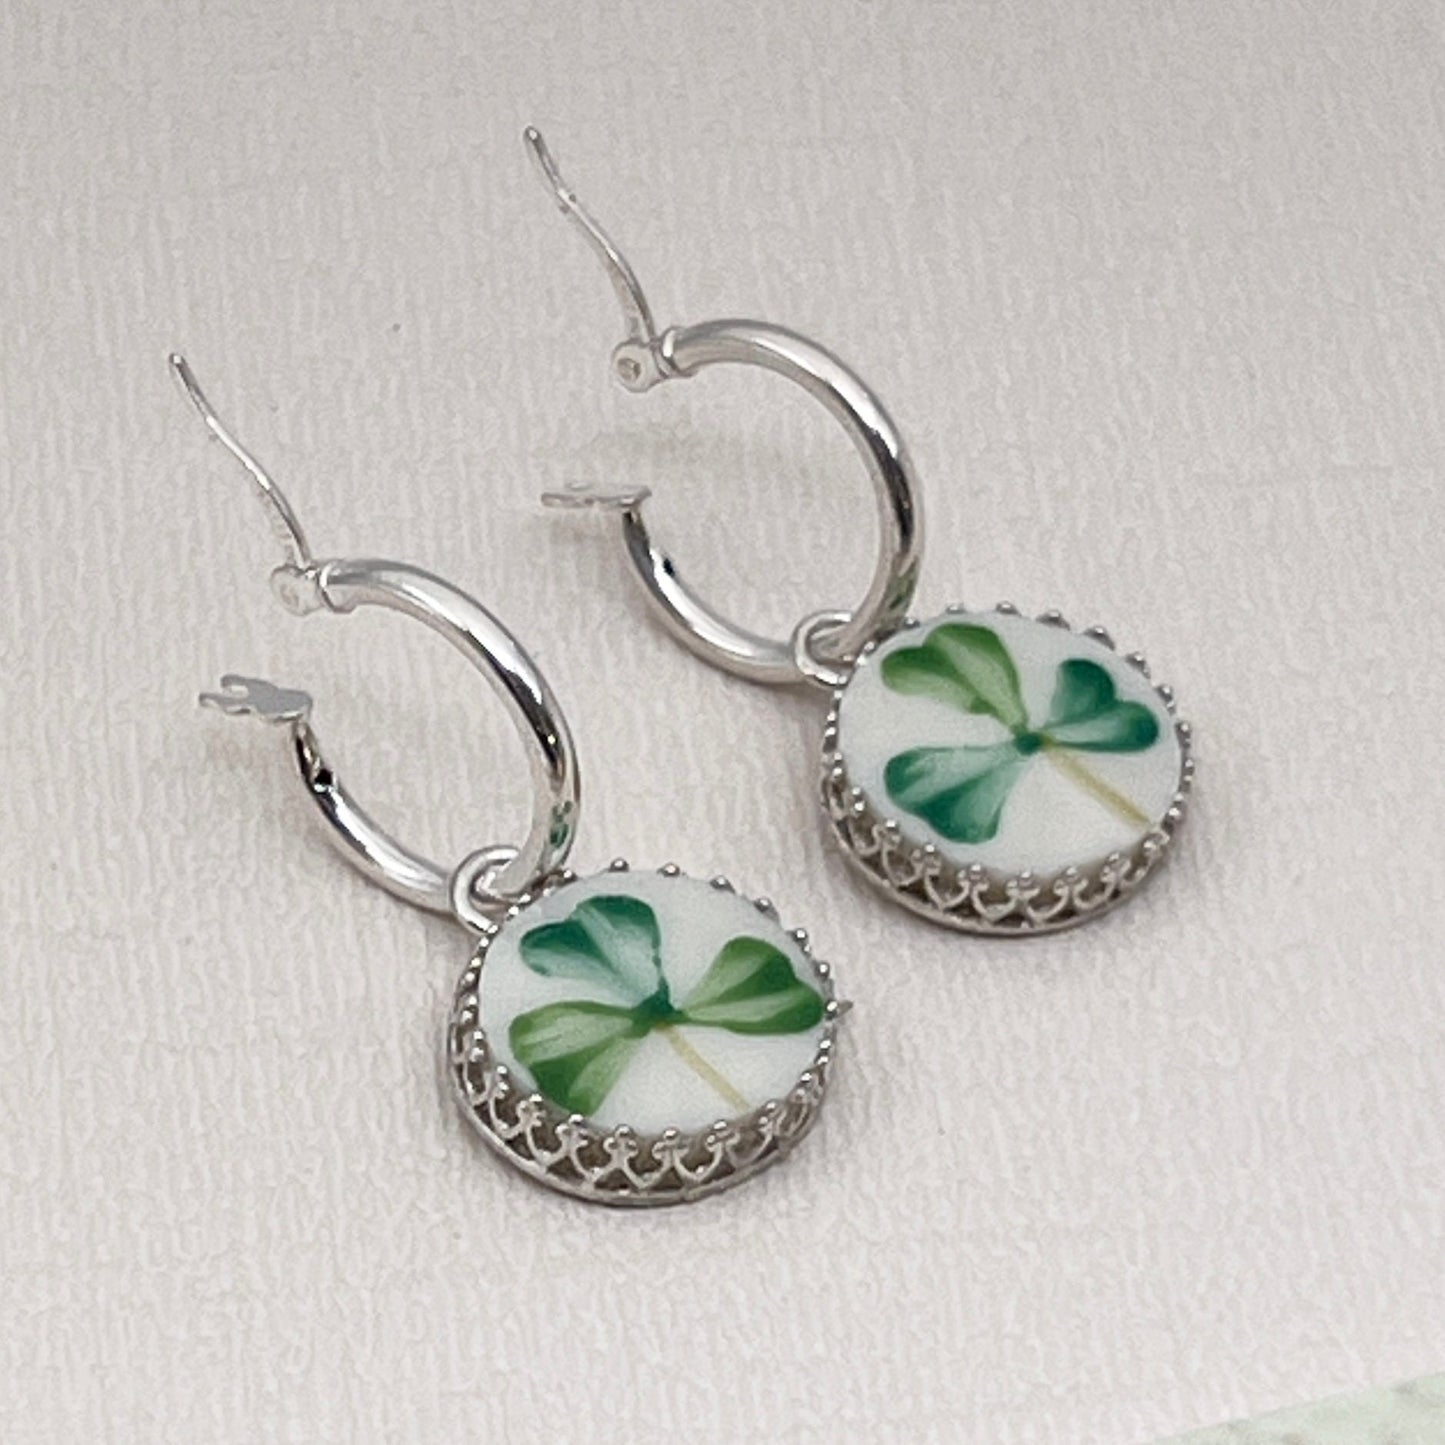 Sterling Silver Shamrock Hoop Earrings, Vintage Broken China Jewelry, Anniversary Gifts for Her, Irish Jewelry Gift